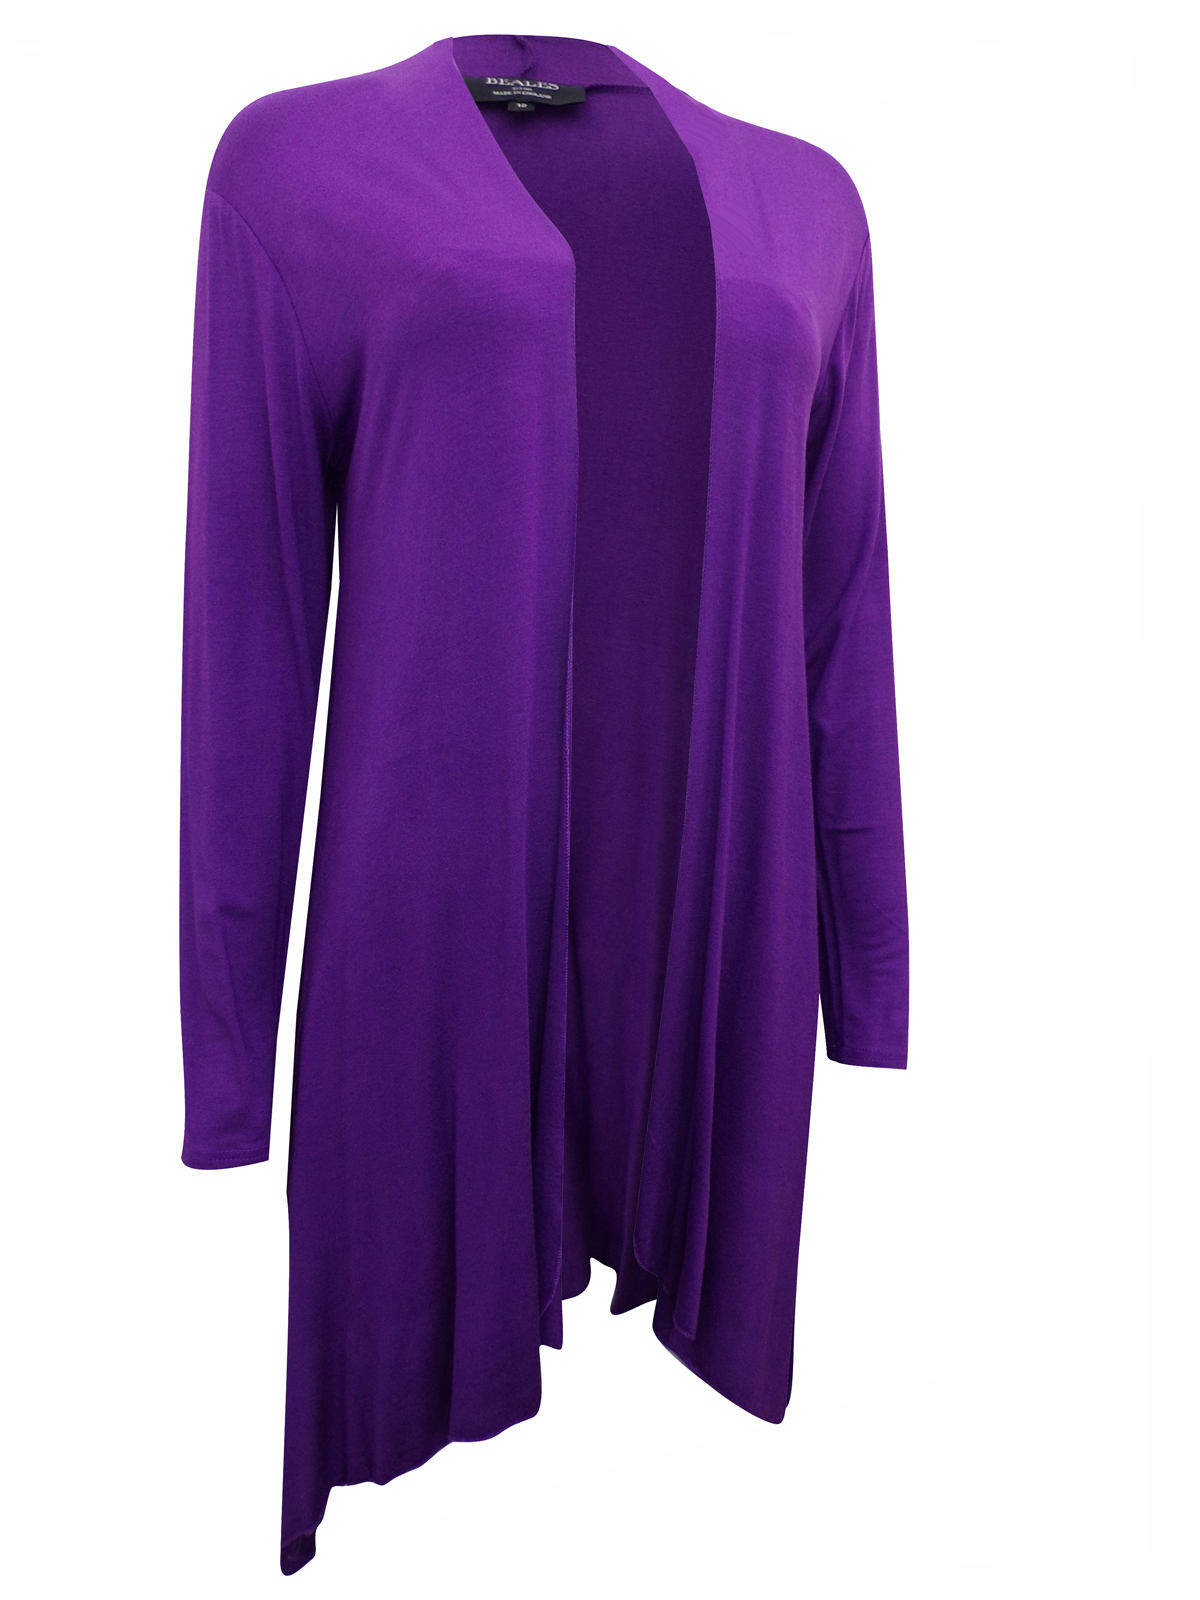 Beales - - Beales PURPLE Open Front Jersey Cardigan - Size 12